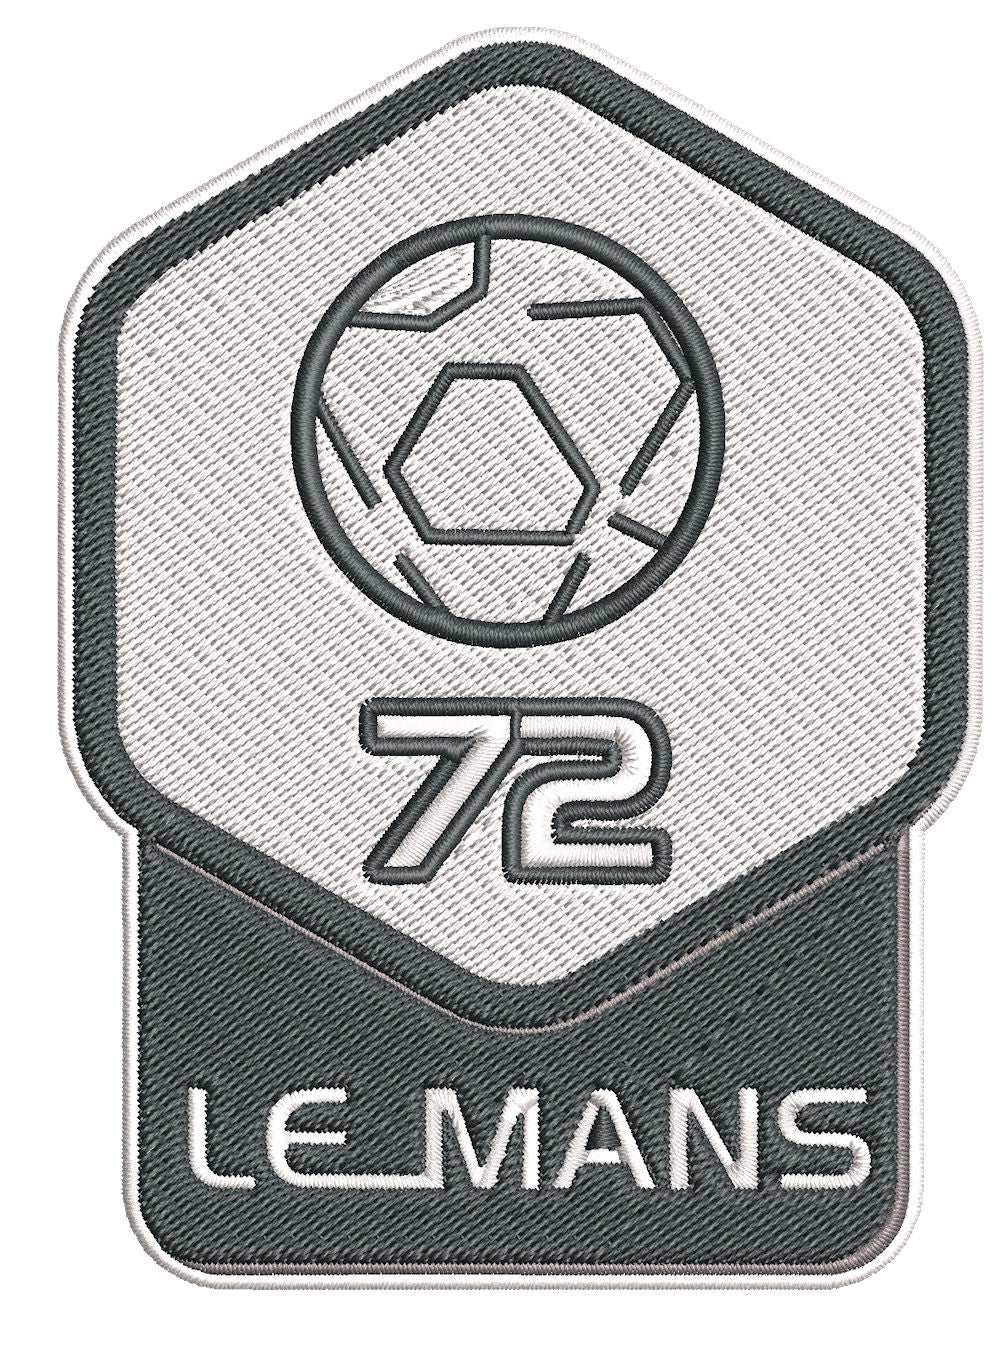 Le Mans Football Team: Embroidery Design FineryEmbroidery